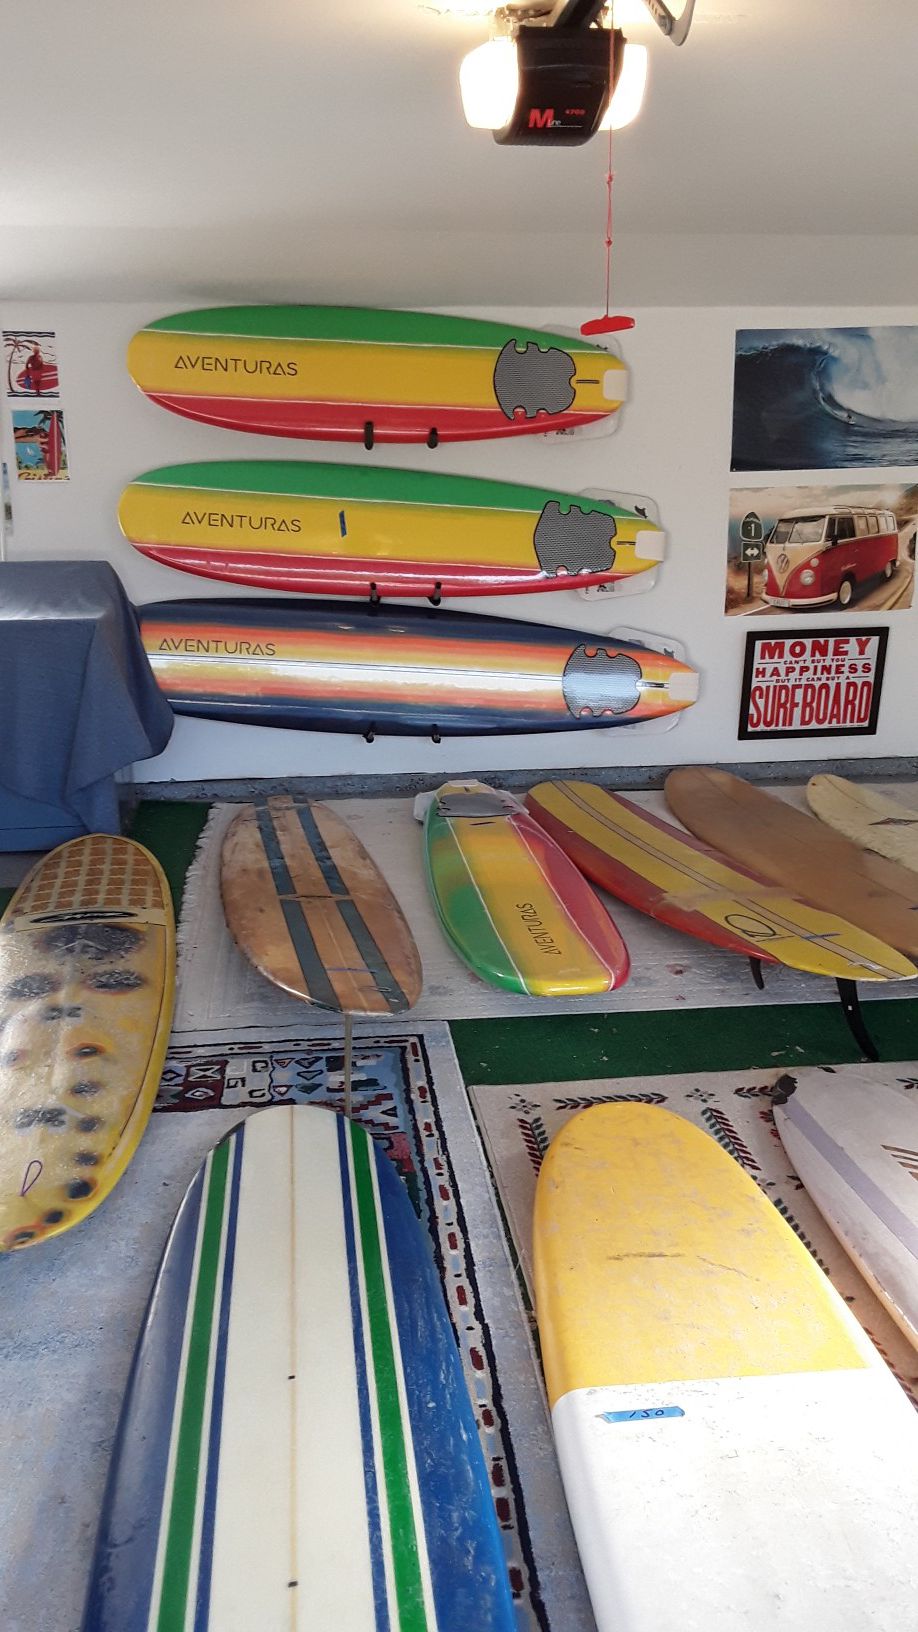 Paddle boards and Surfboards